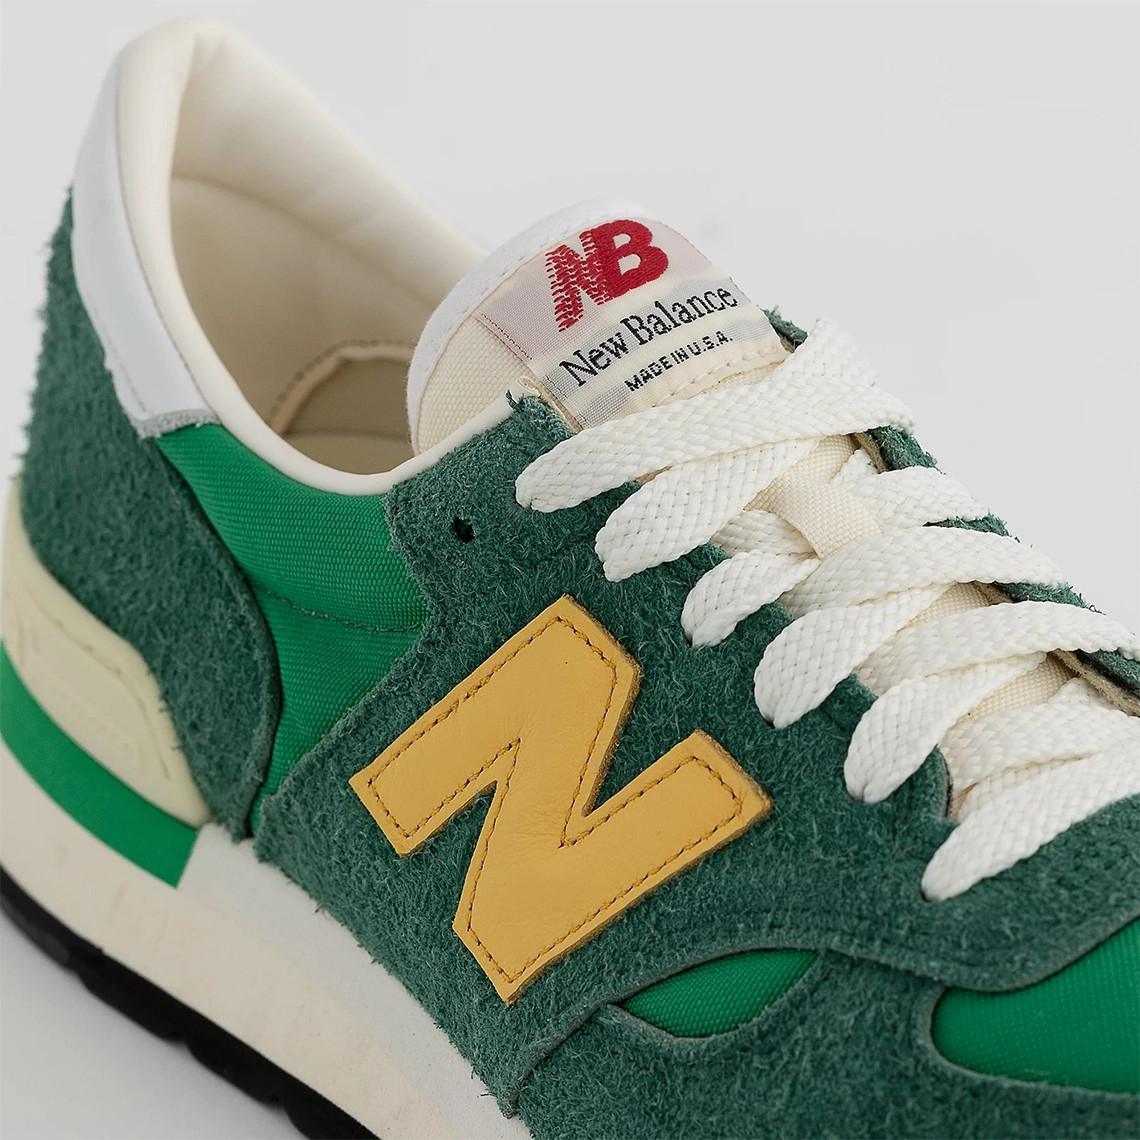 La New Balance 990 MADE In USA "Green/Yellow" arrive le 30 mars